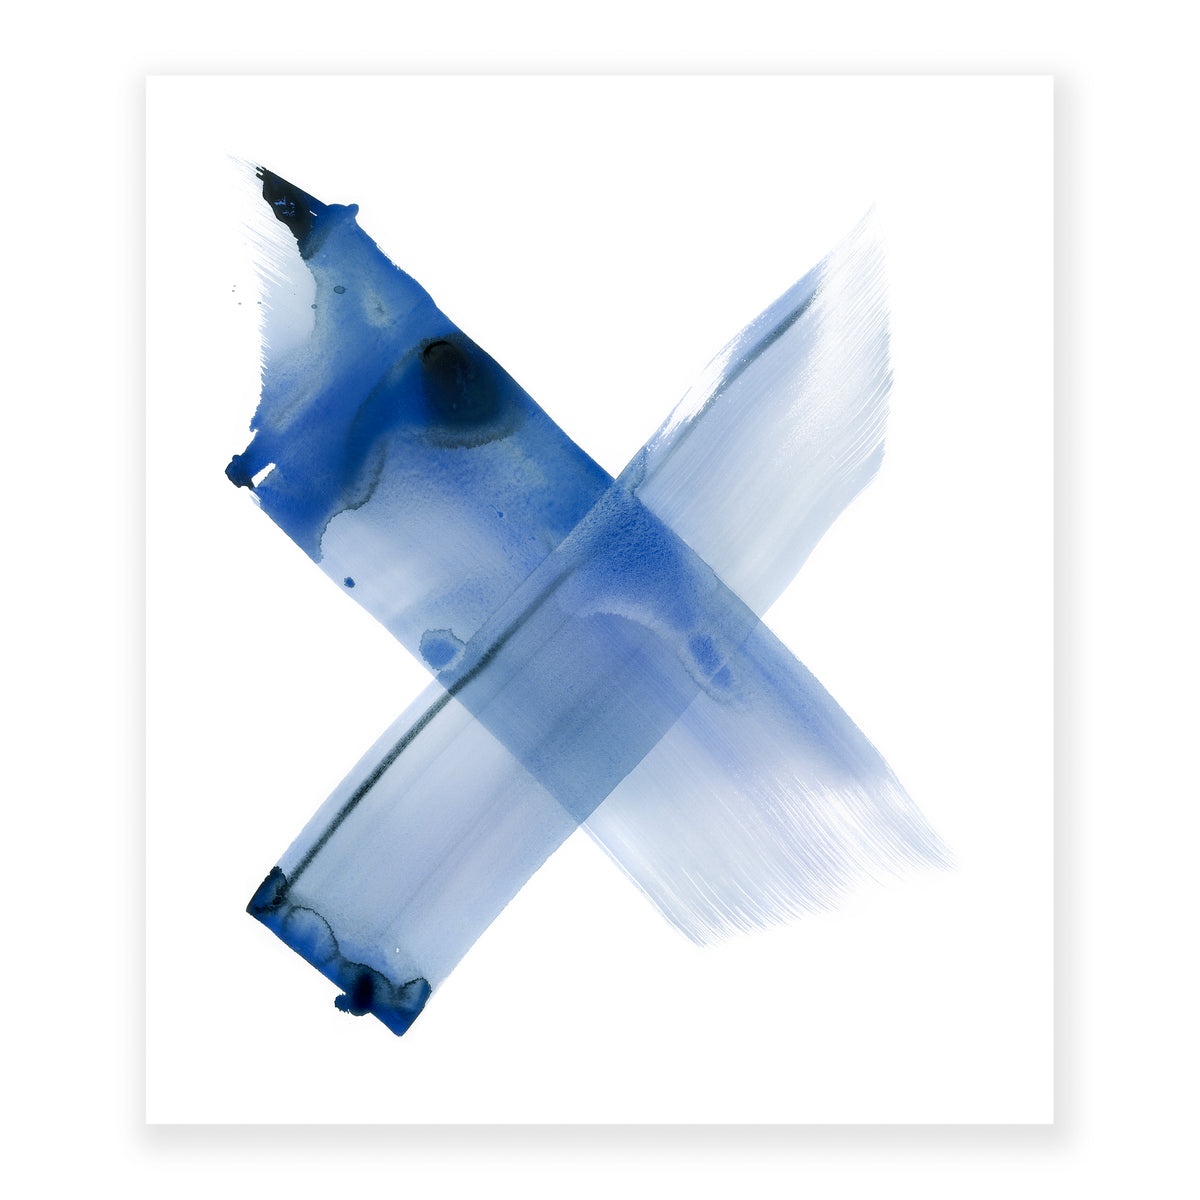 An original painting illustrating the figure x in watercolor creating a gradient from left to right with pools of blue dye on a soft white background